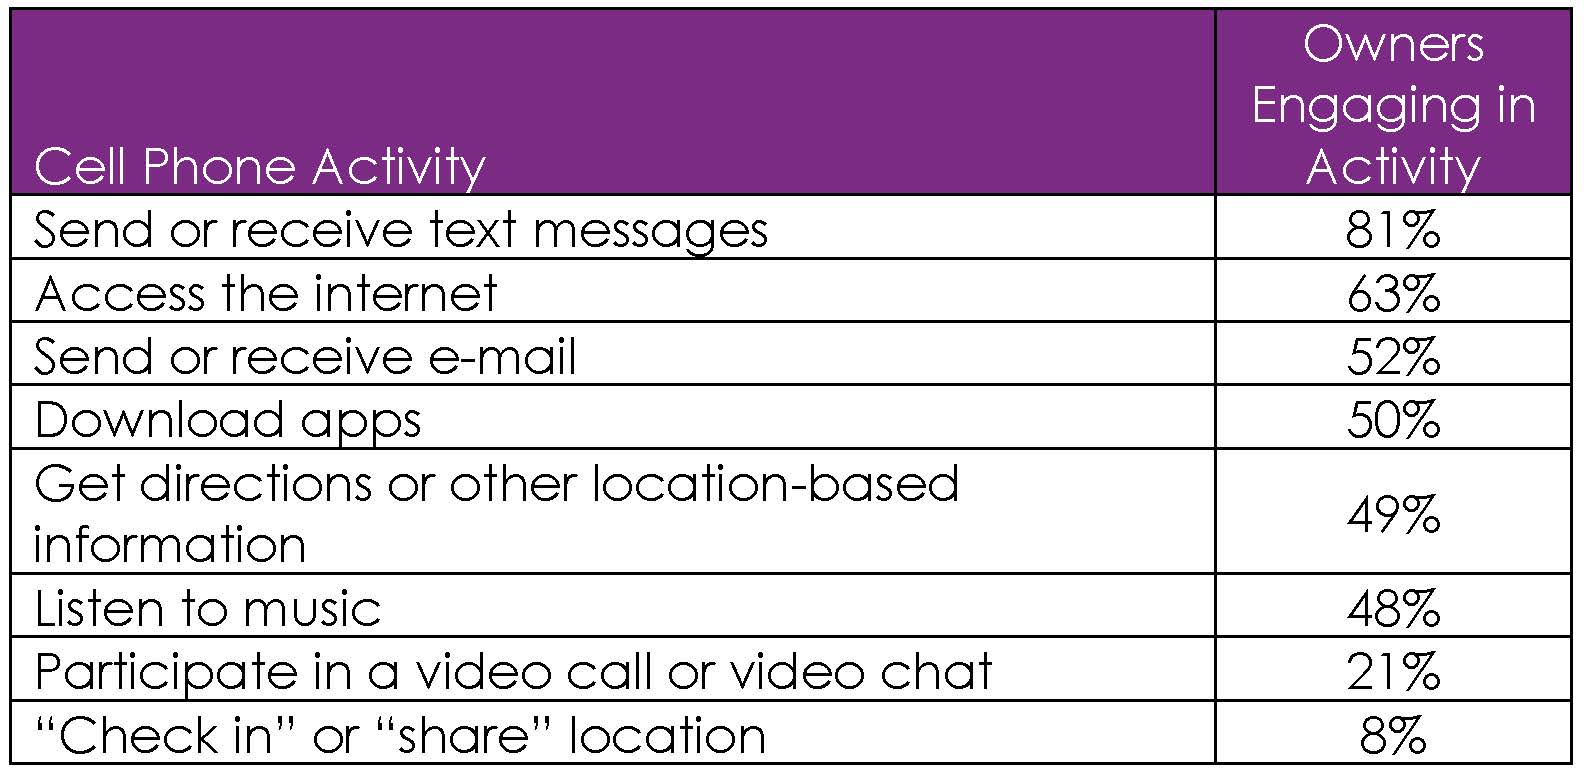 Cell Phone Activity